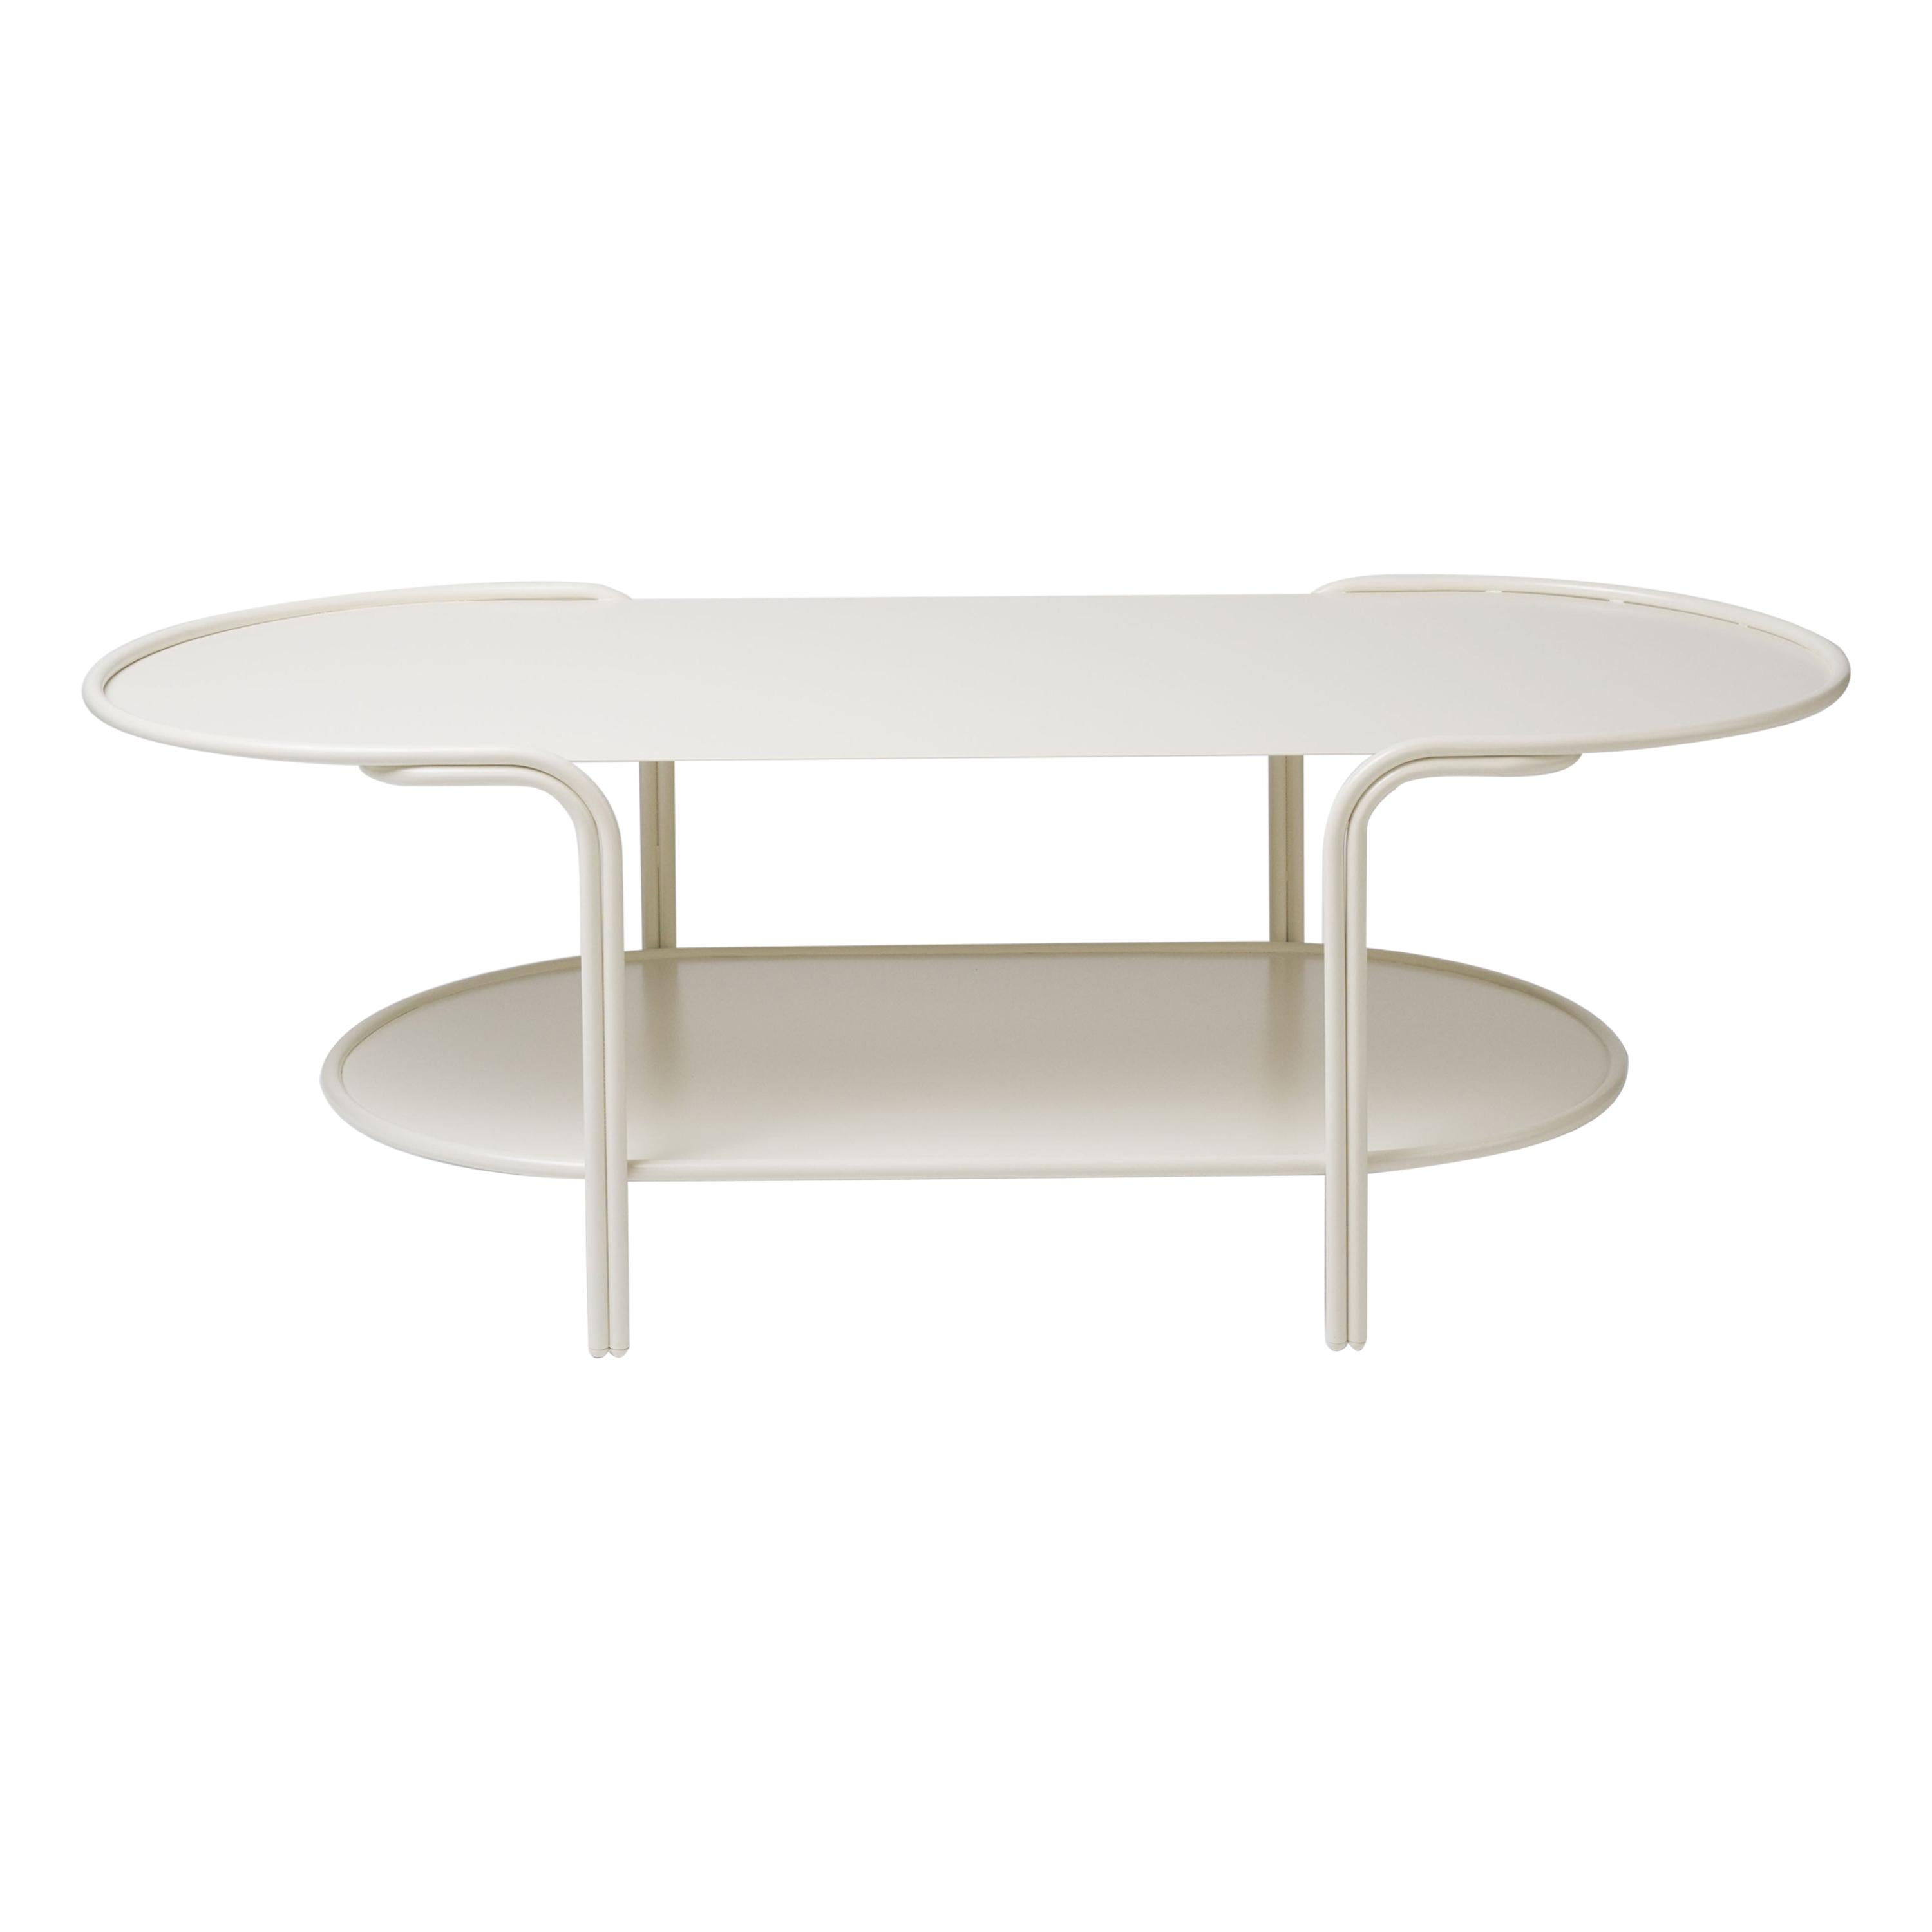 Tiered Outdoor Bancroft Coffee Table in Matte Cream Stainless Steel by Laun